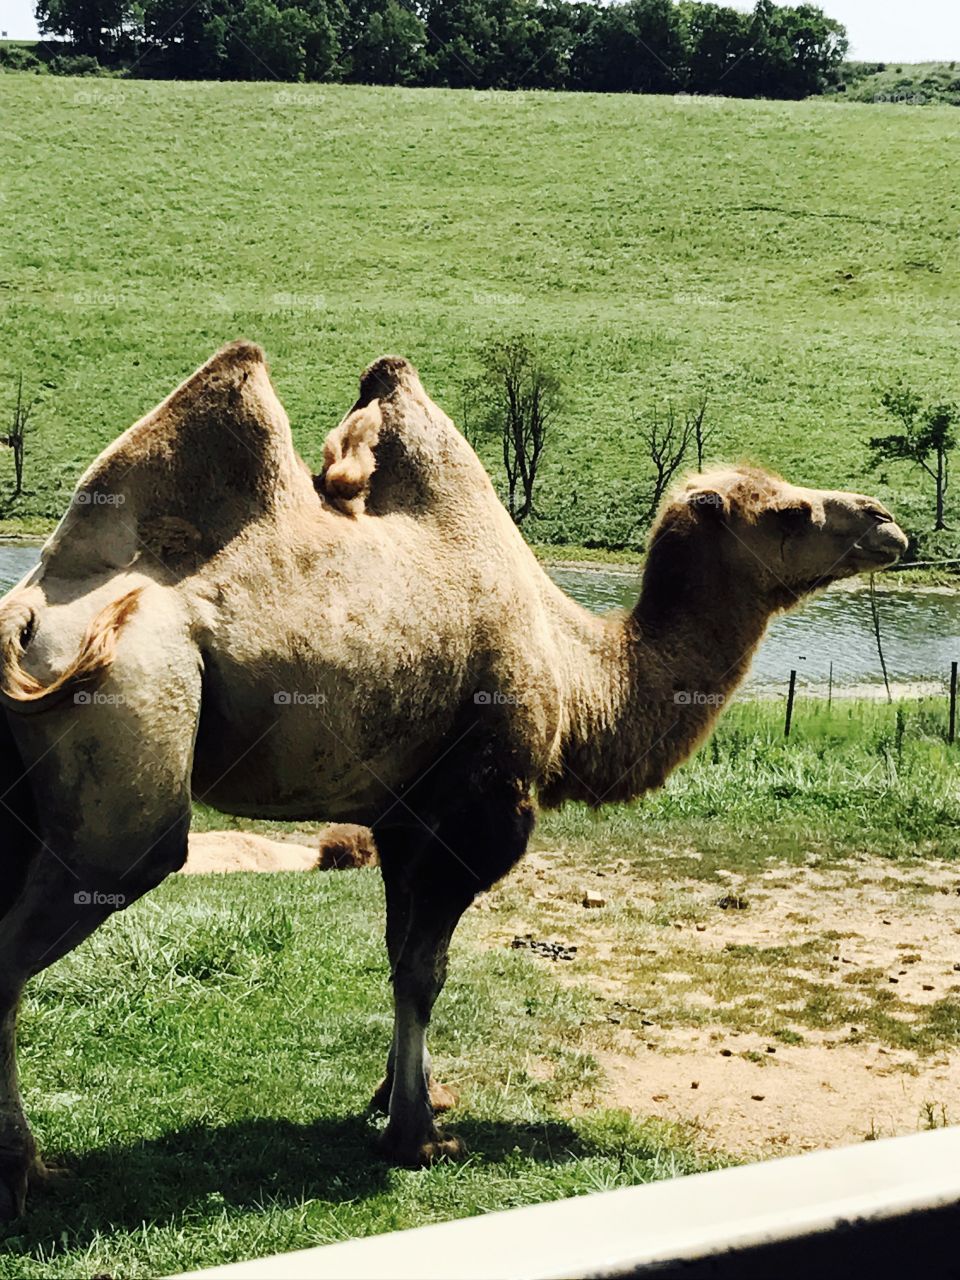 Camel of the palace